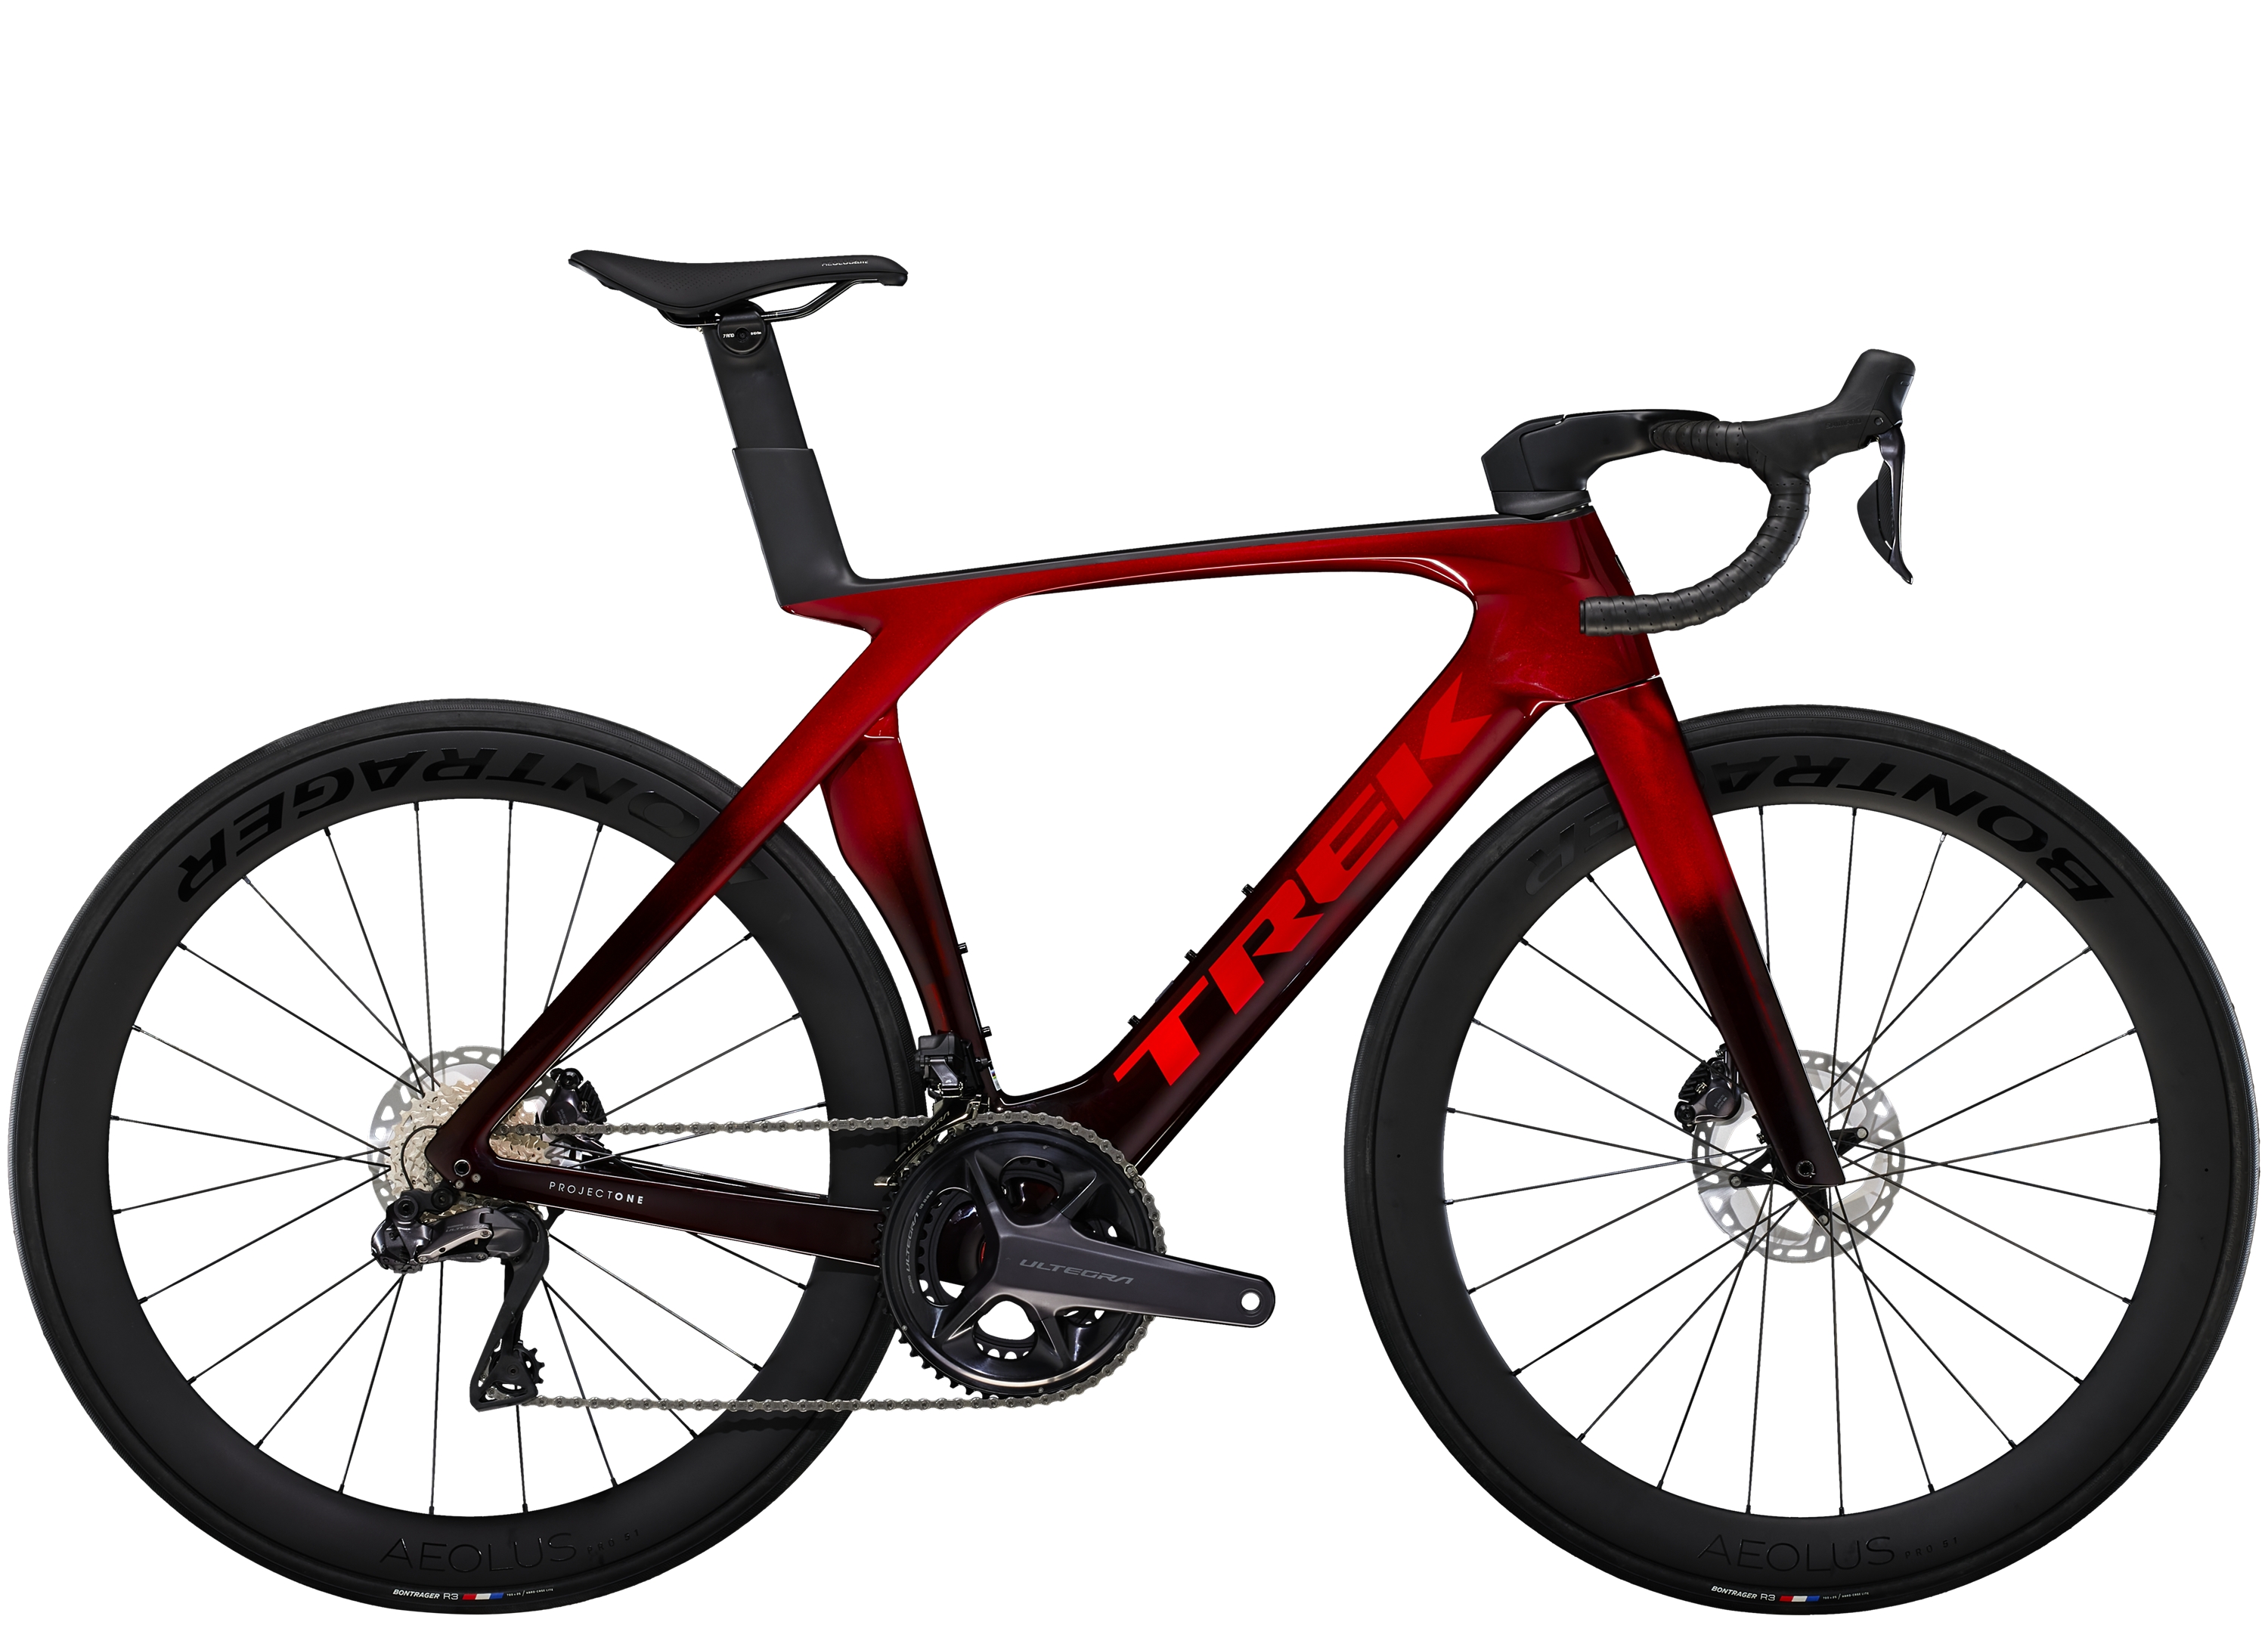 <a href="https://cycles-clement.be/product/madone-slr-7-54-metallic-red-smoke-to-red-carbon-s/">MADONE SLR 7 54 METALLIC RED SMOKE TO RED CARBON S</a>